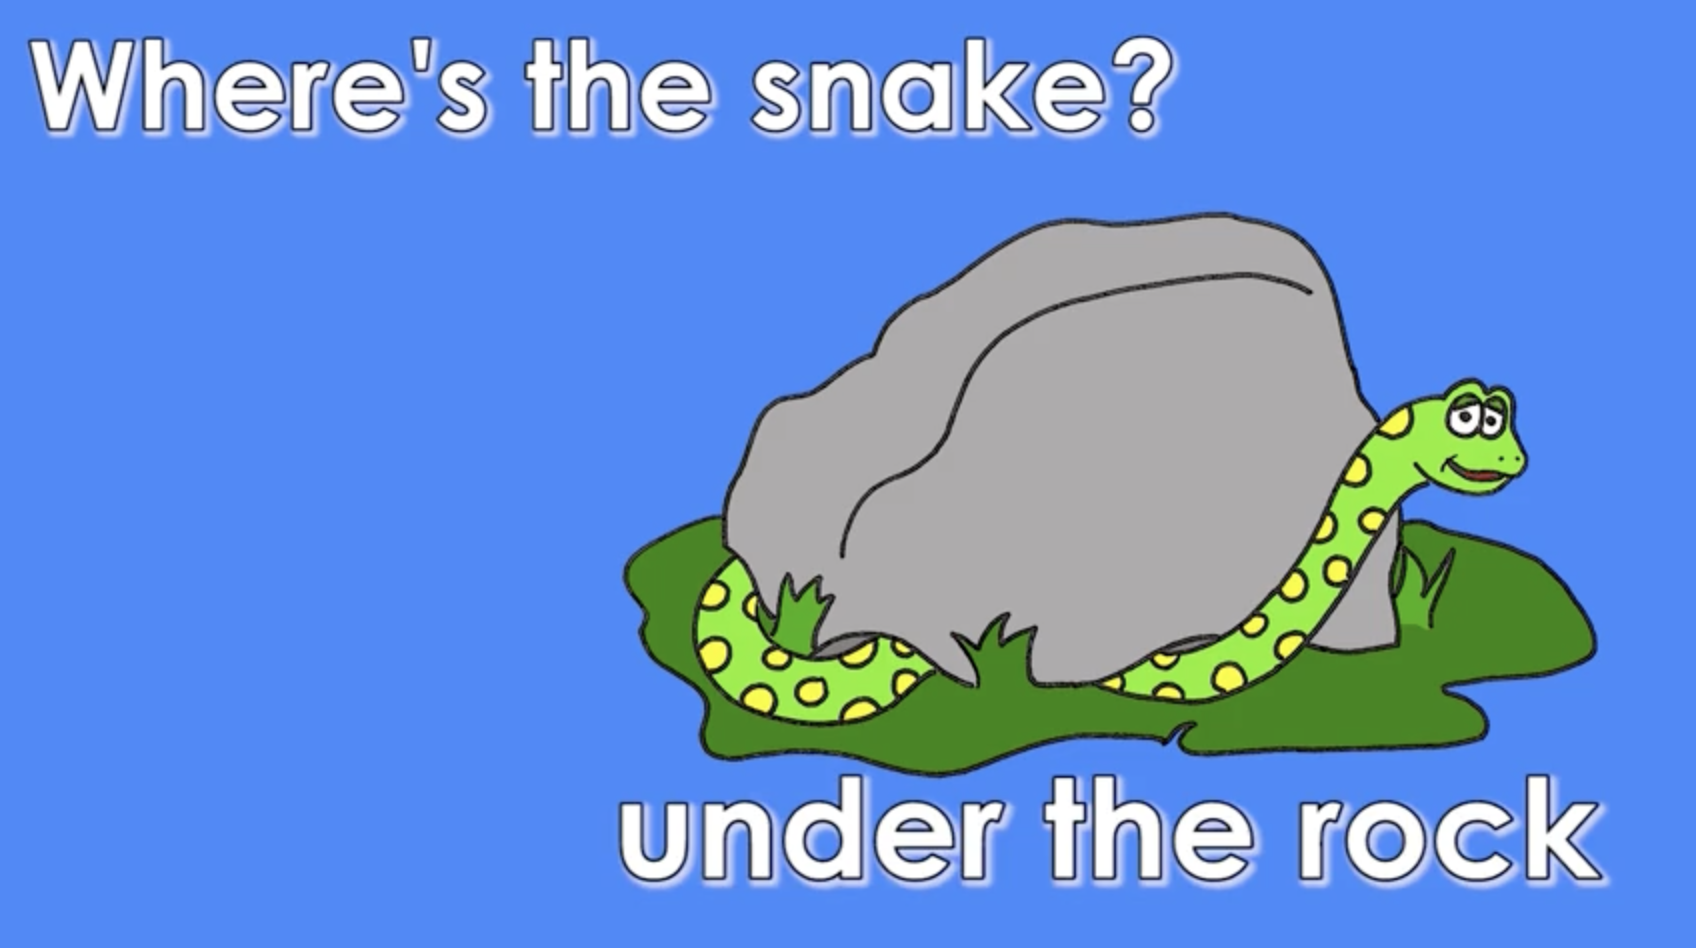 Where's the snake? Under the rock